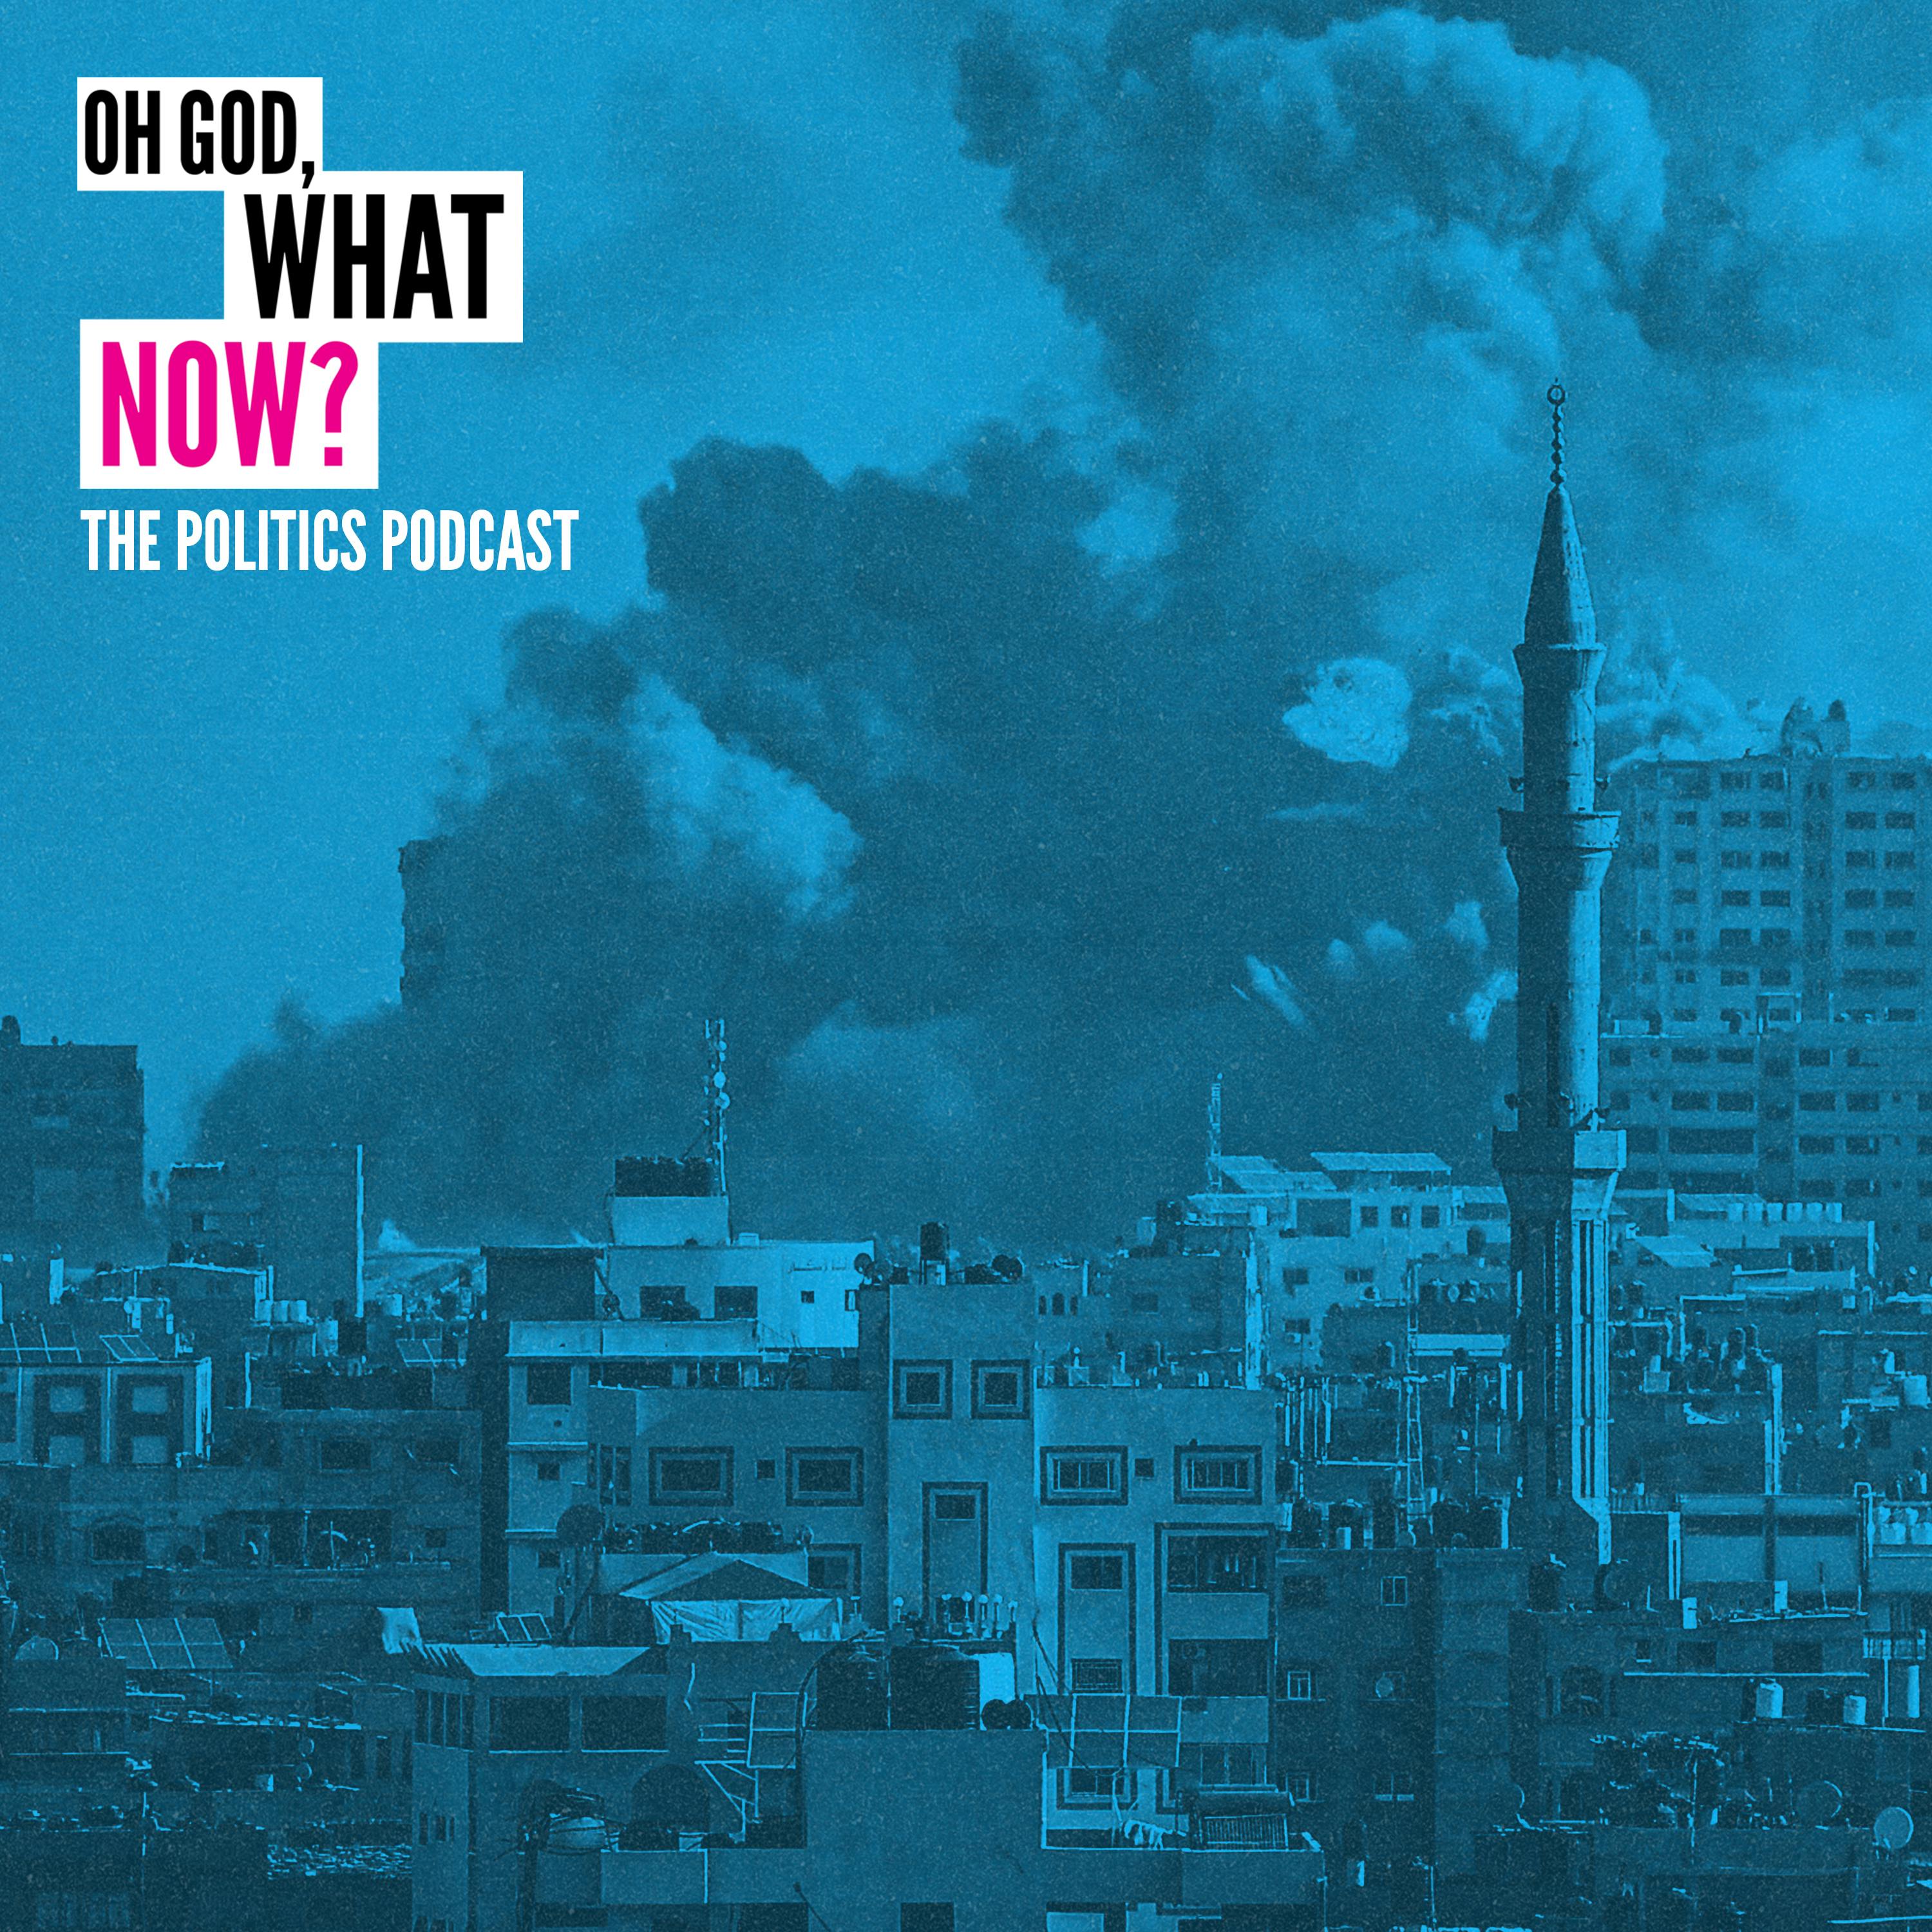 Israel/Hamas ceasefire: What’s changed and what’s next?